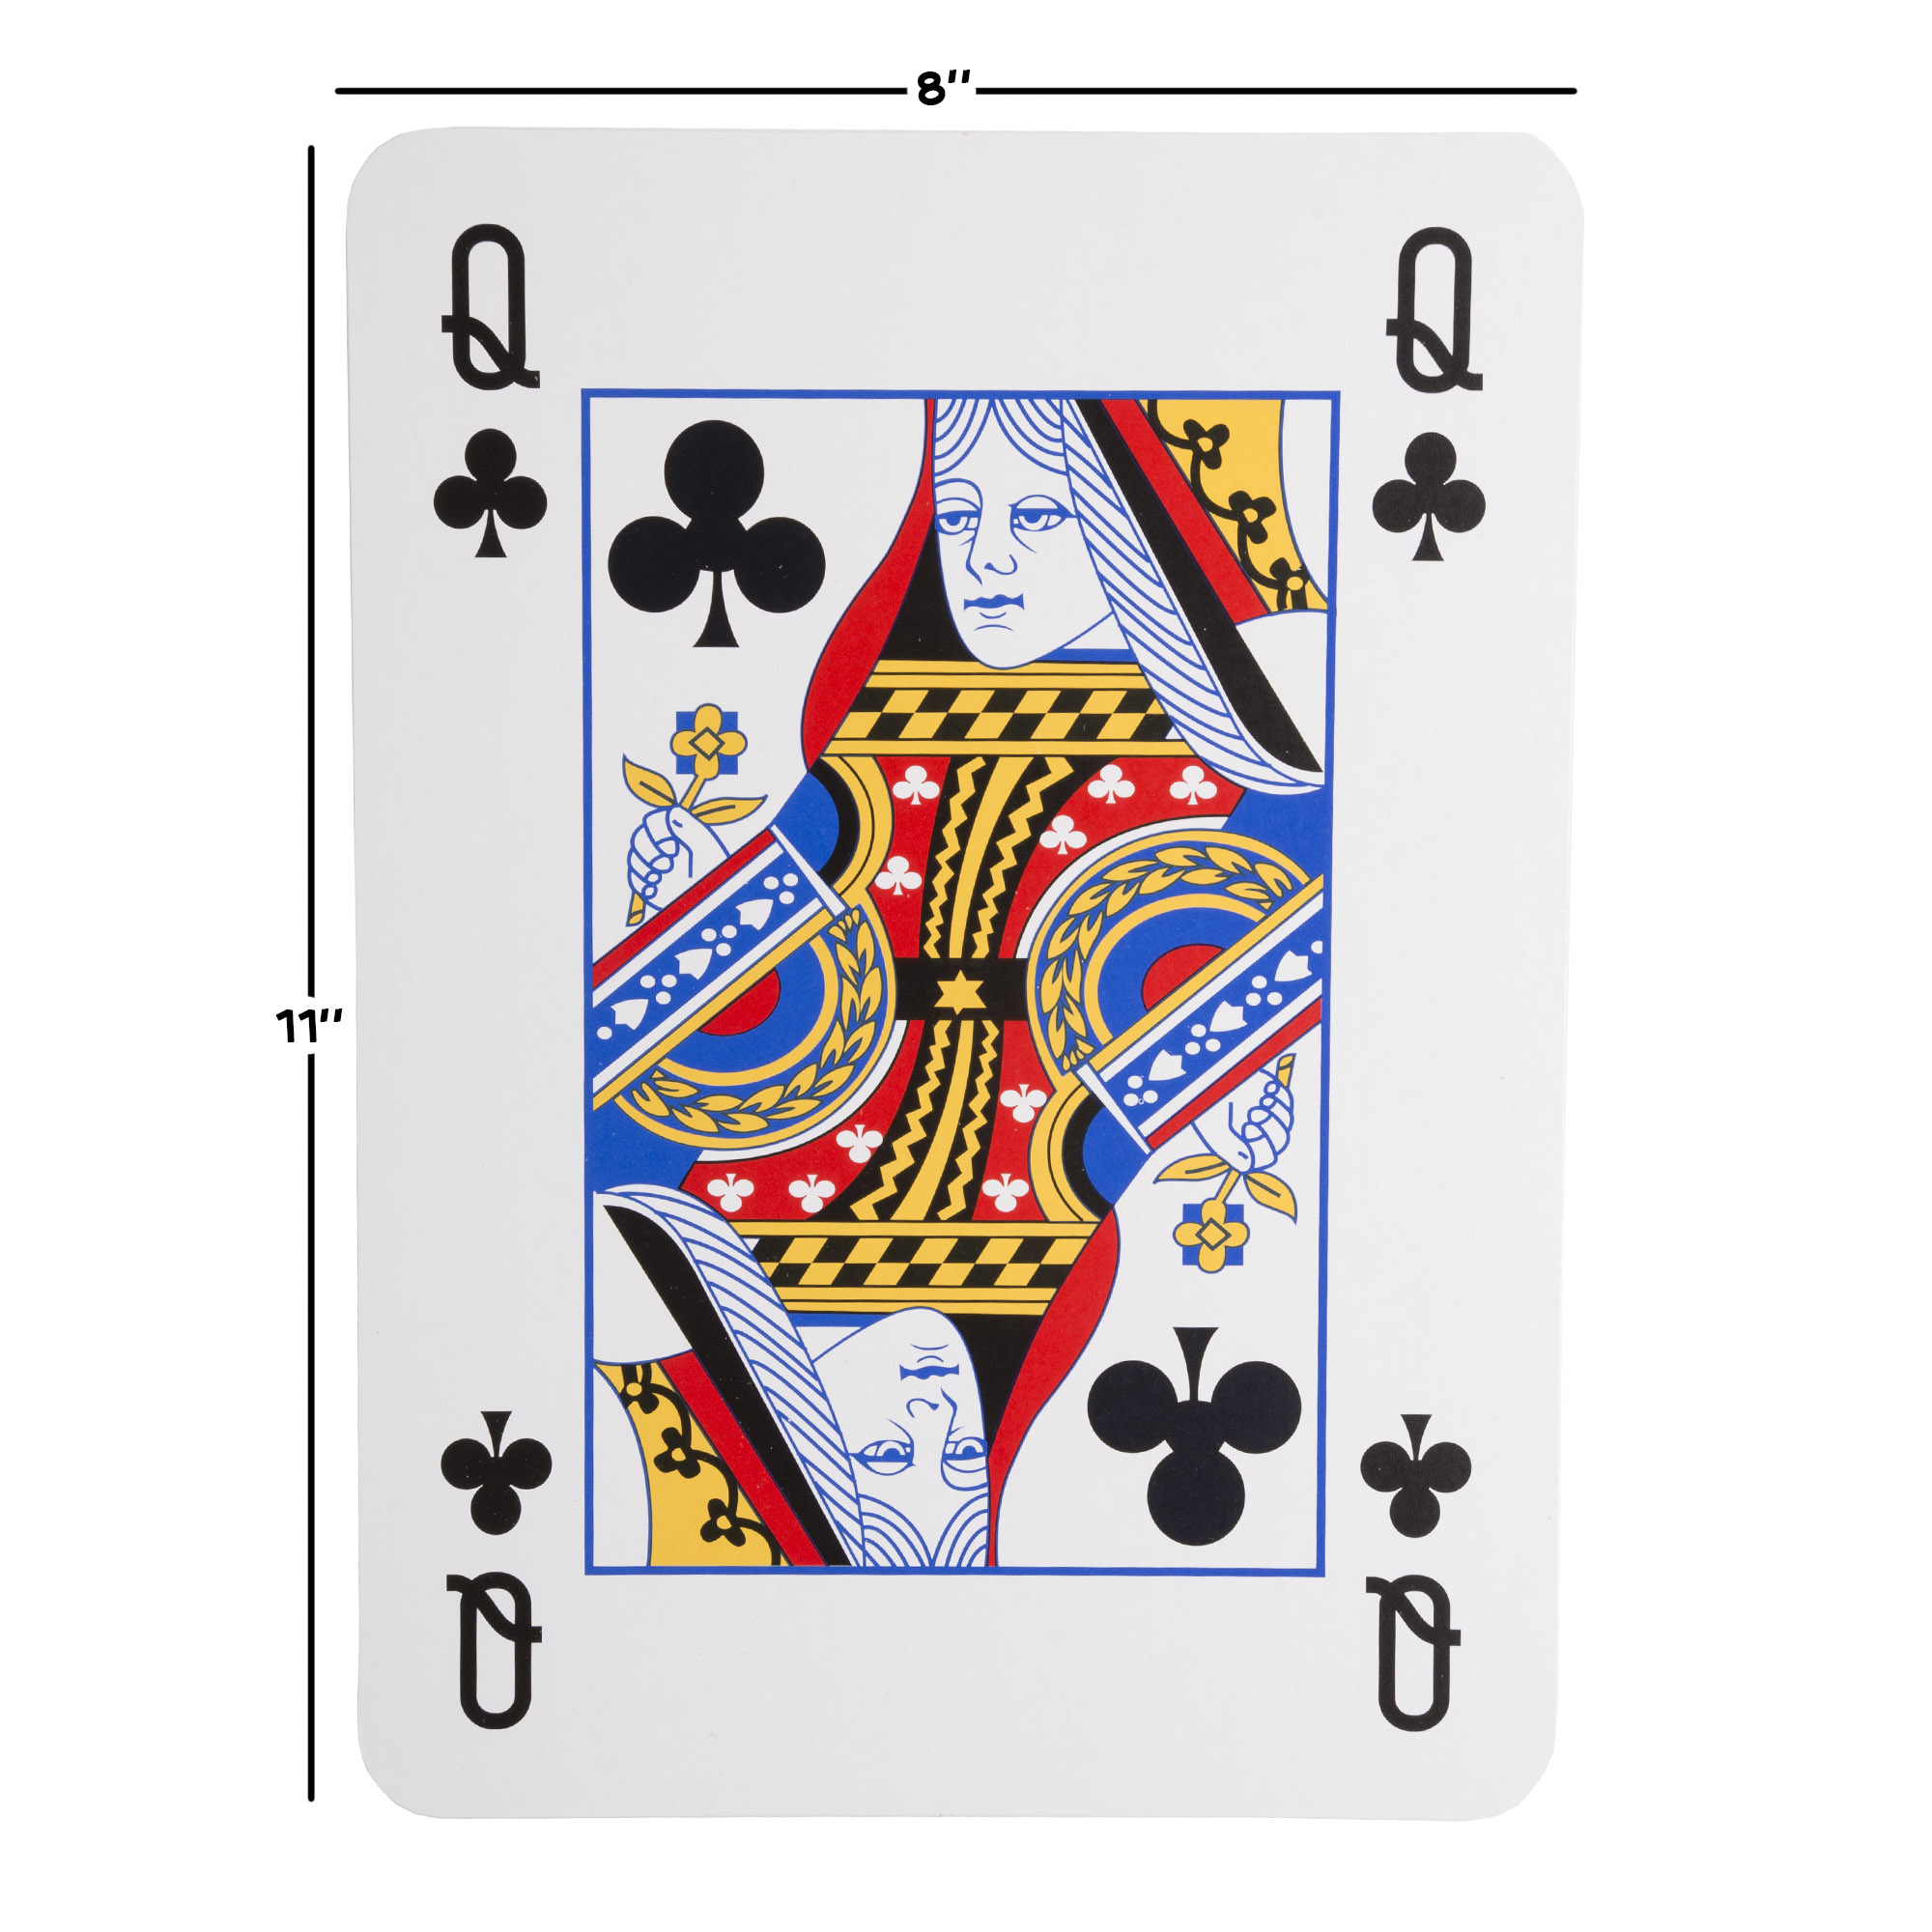 Giant Jumbo Playing Cards 8 X 11 Inches Plastic Coated Huge Deck Of 52 Plus 2 Jokers